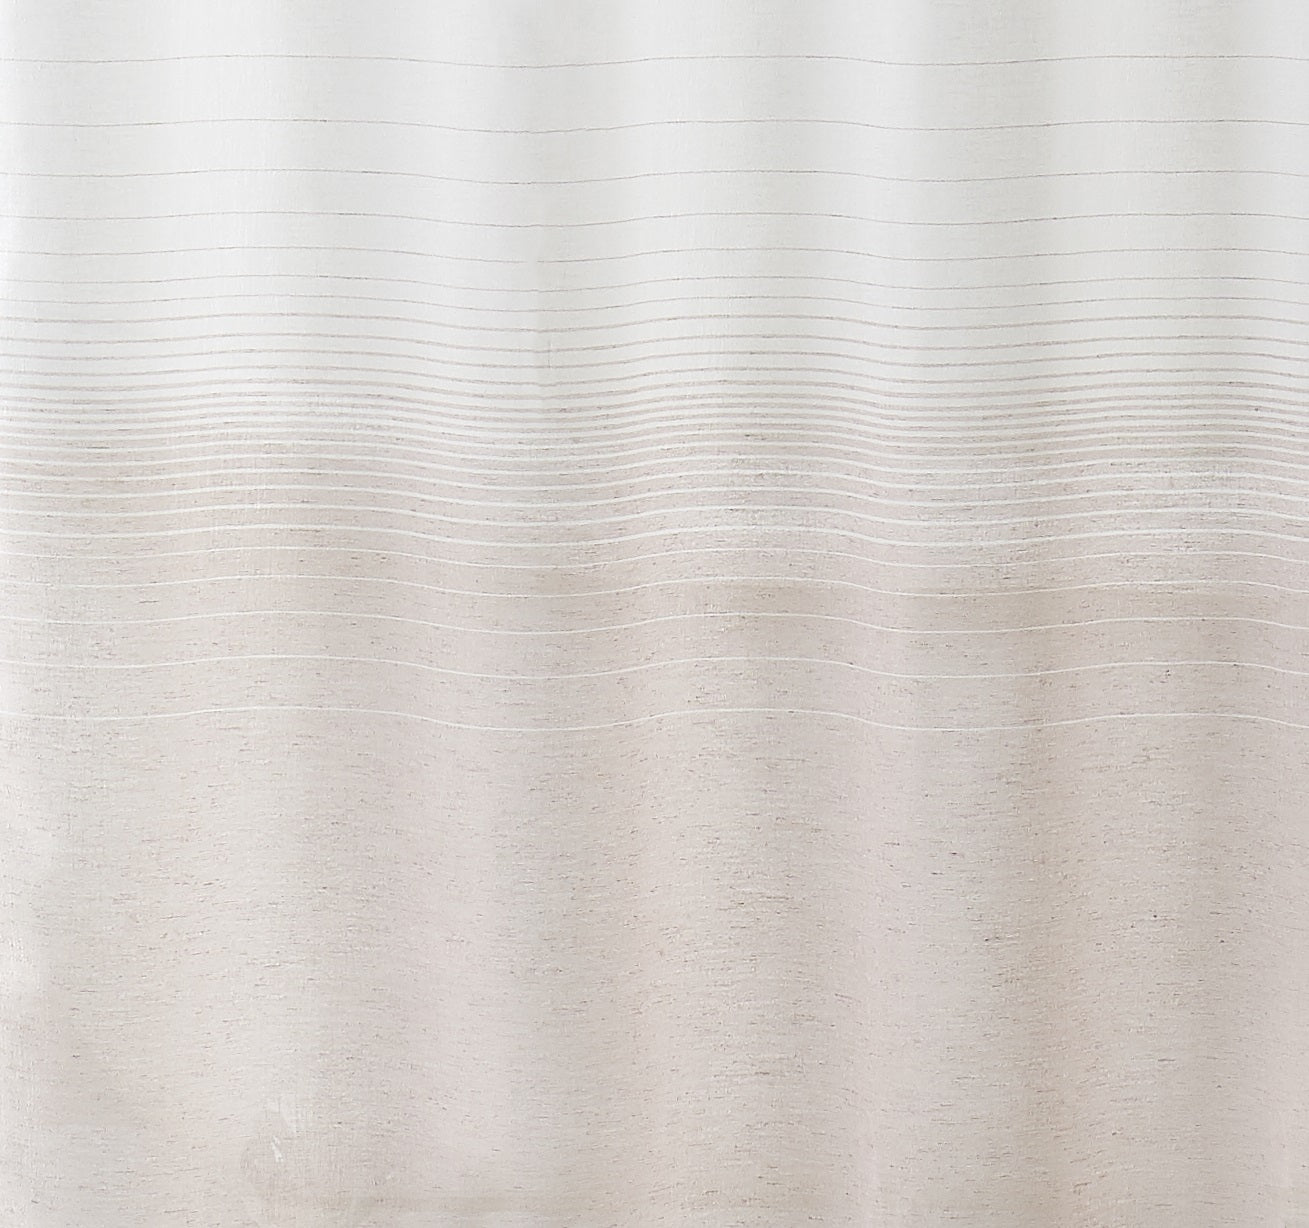 Dainty Home Linea 3D Ombre Textured Weaved Linen Look Striped Designed Fabric Shower Curtain